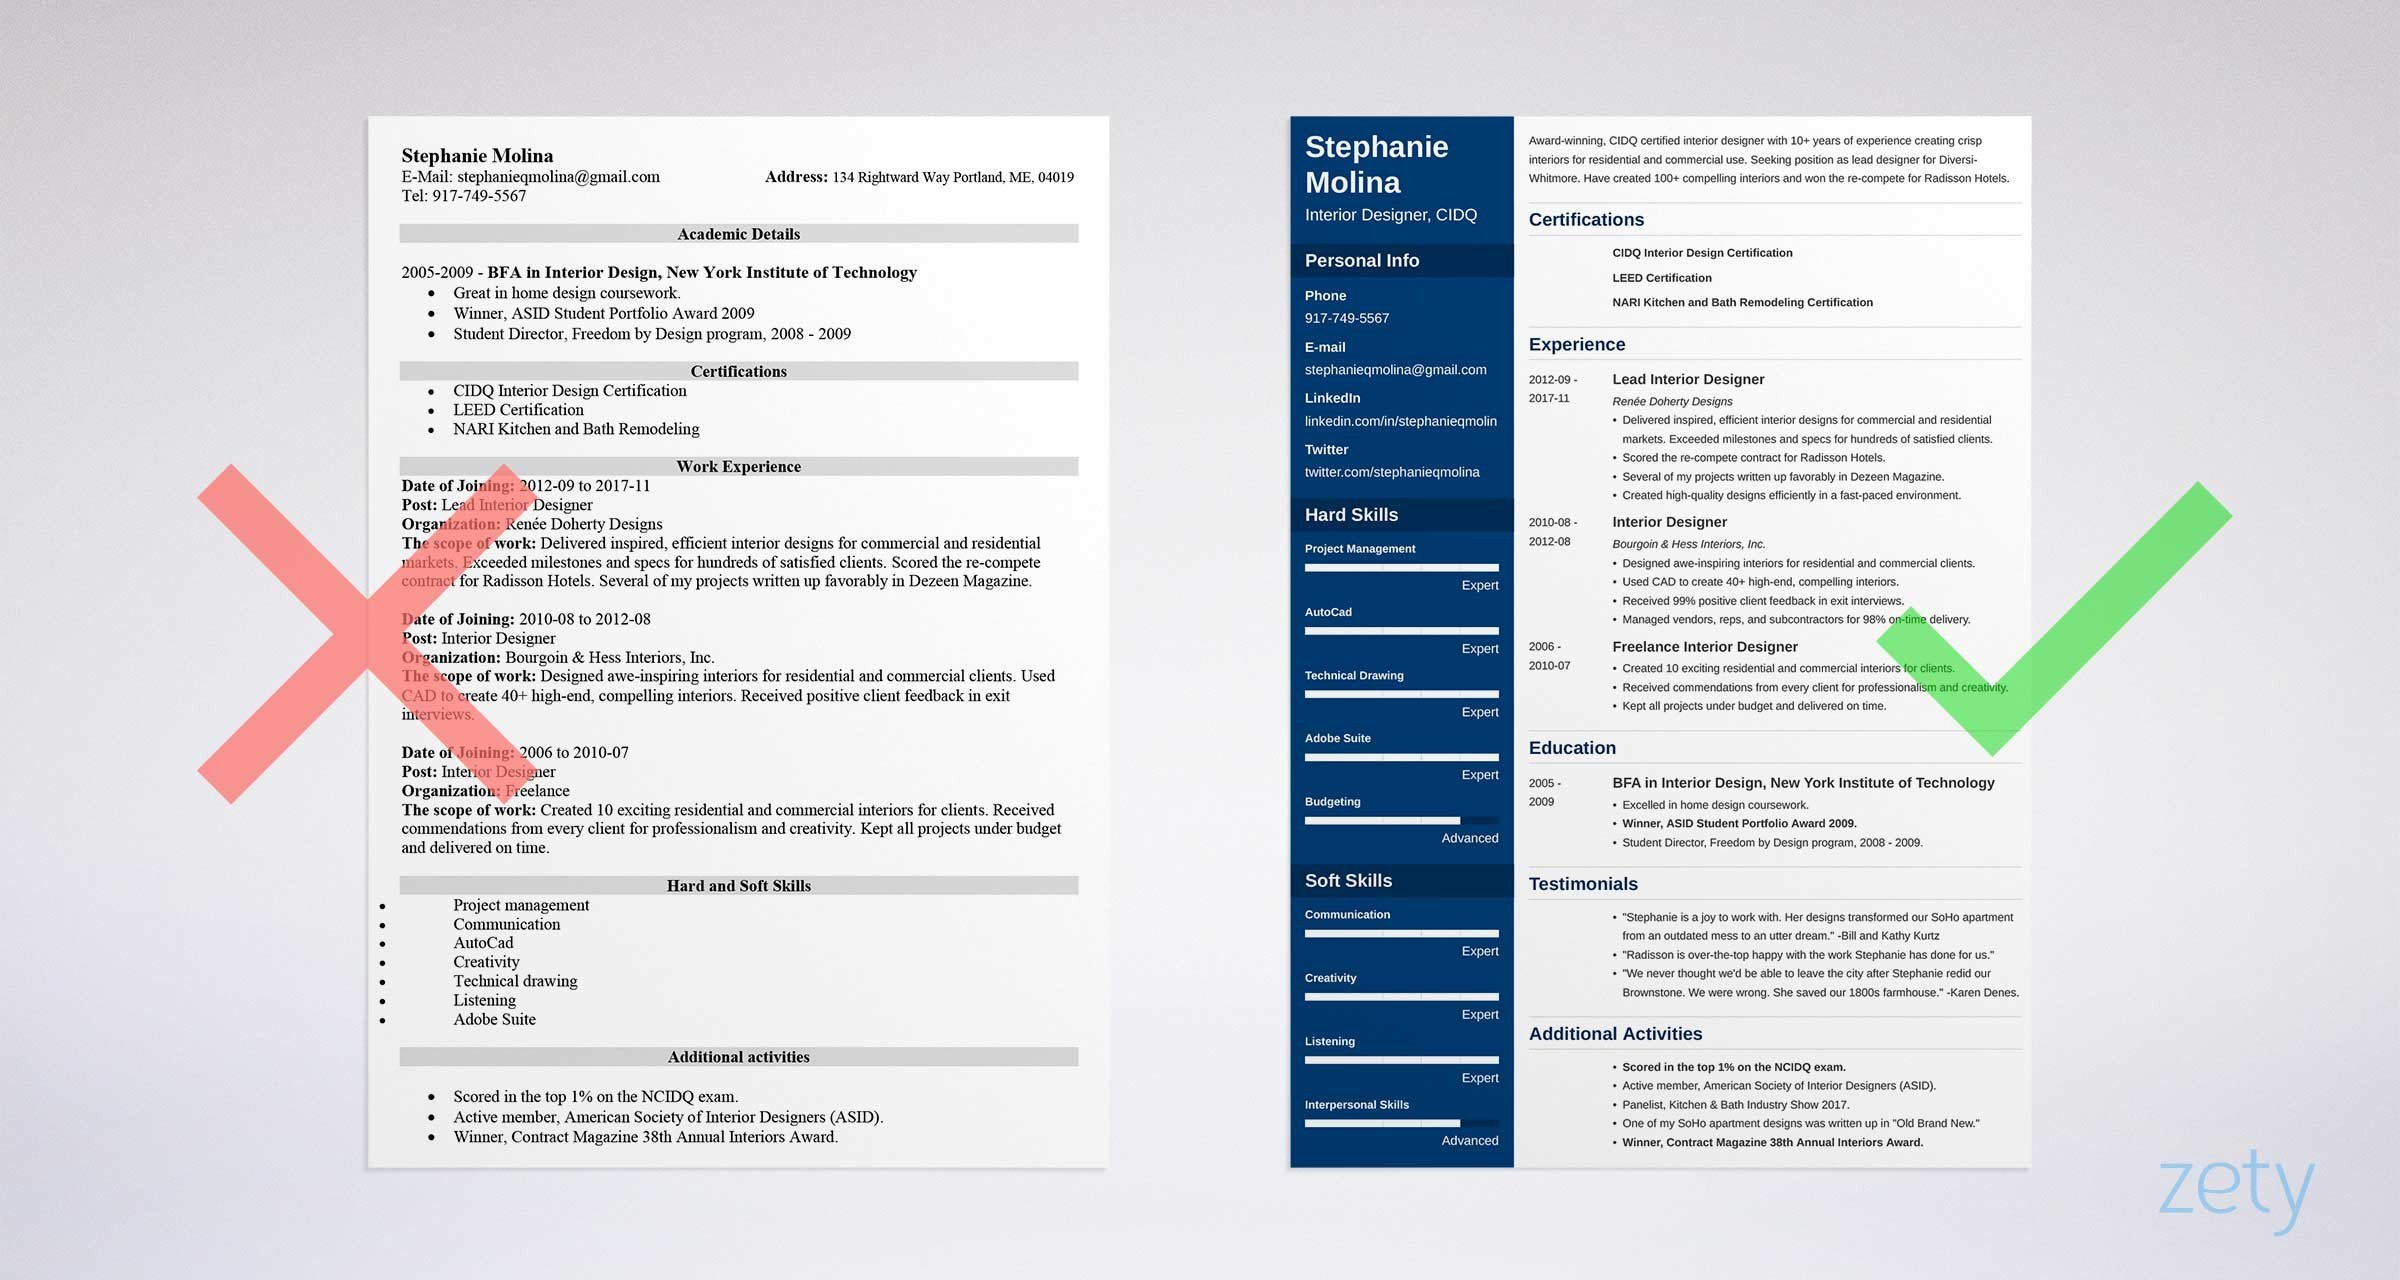 Free Resume Templates 17 Free CV Templates to Download & Use